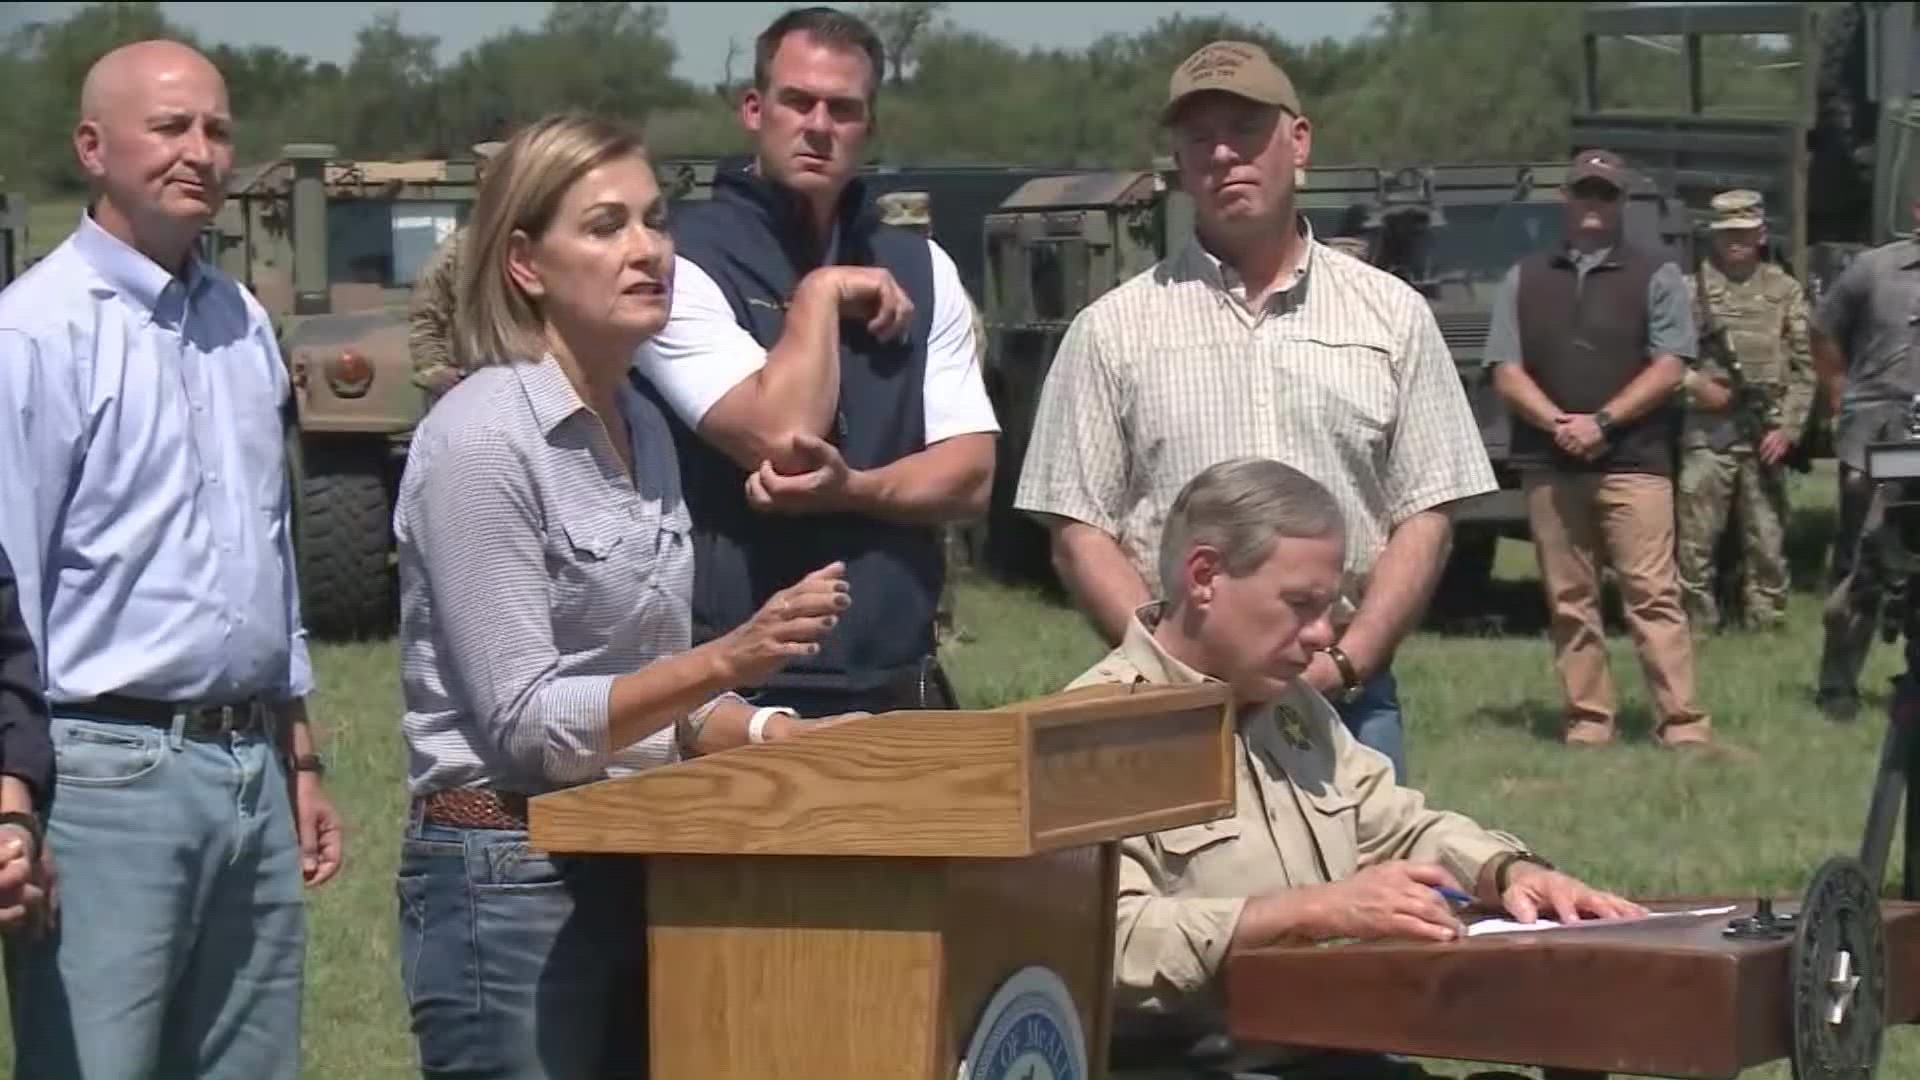 Reynolds joined Texas Gov. Greg Abbott, along with several other Republican governors, to talk about the Biden administration's policies at the border.